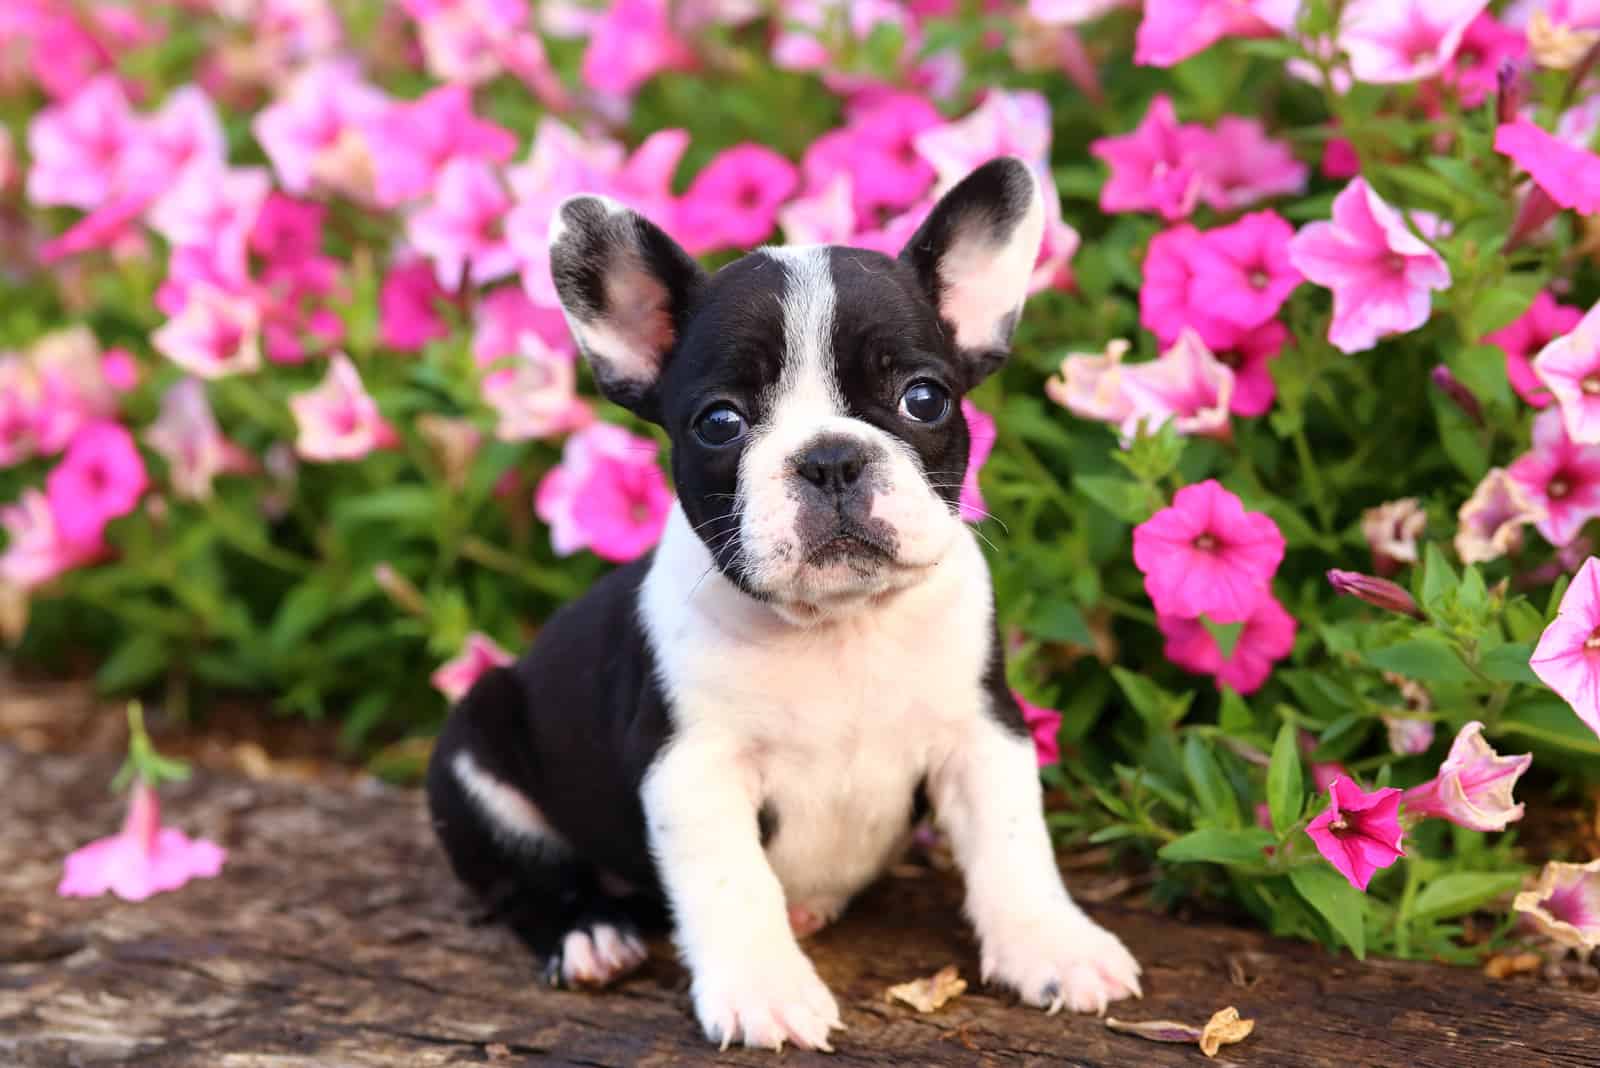 French Bulldog puppy standing with flowers in background